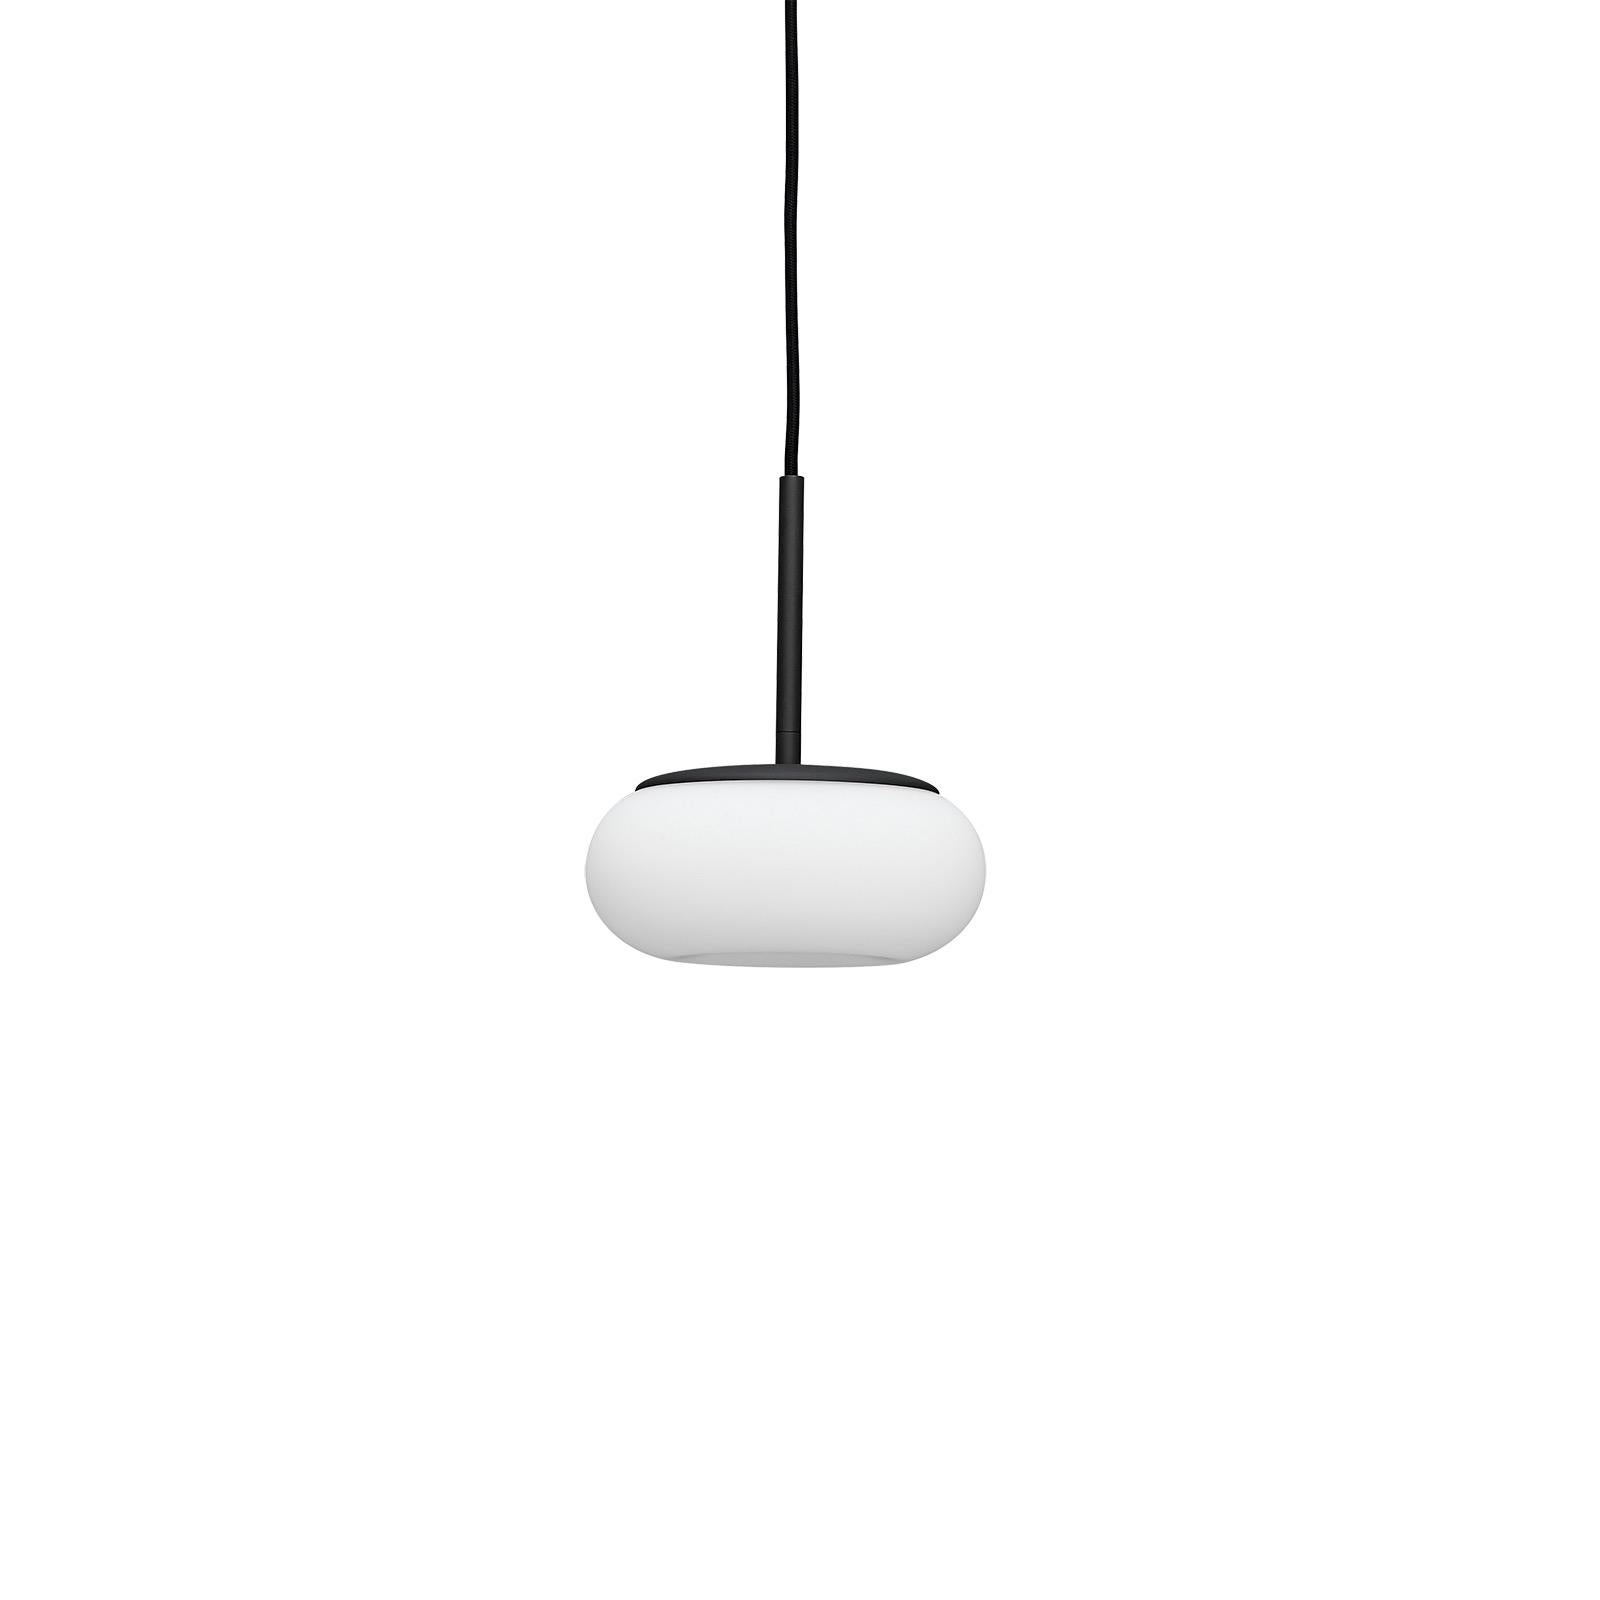 Korean Contemporary Pendant Lamp 'Mozzi' by ago 'Small - Charcoal' For Sale